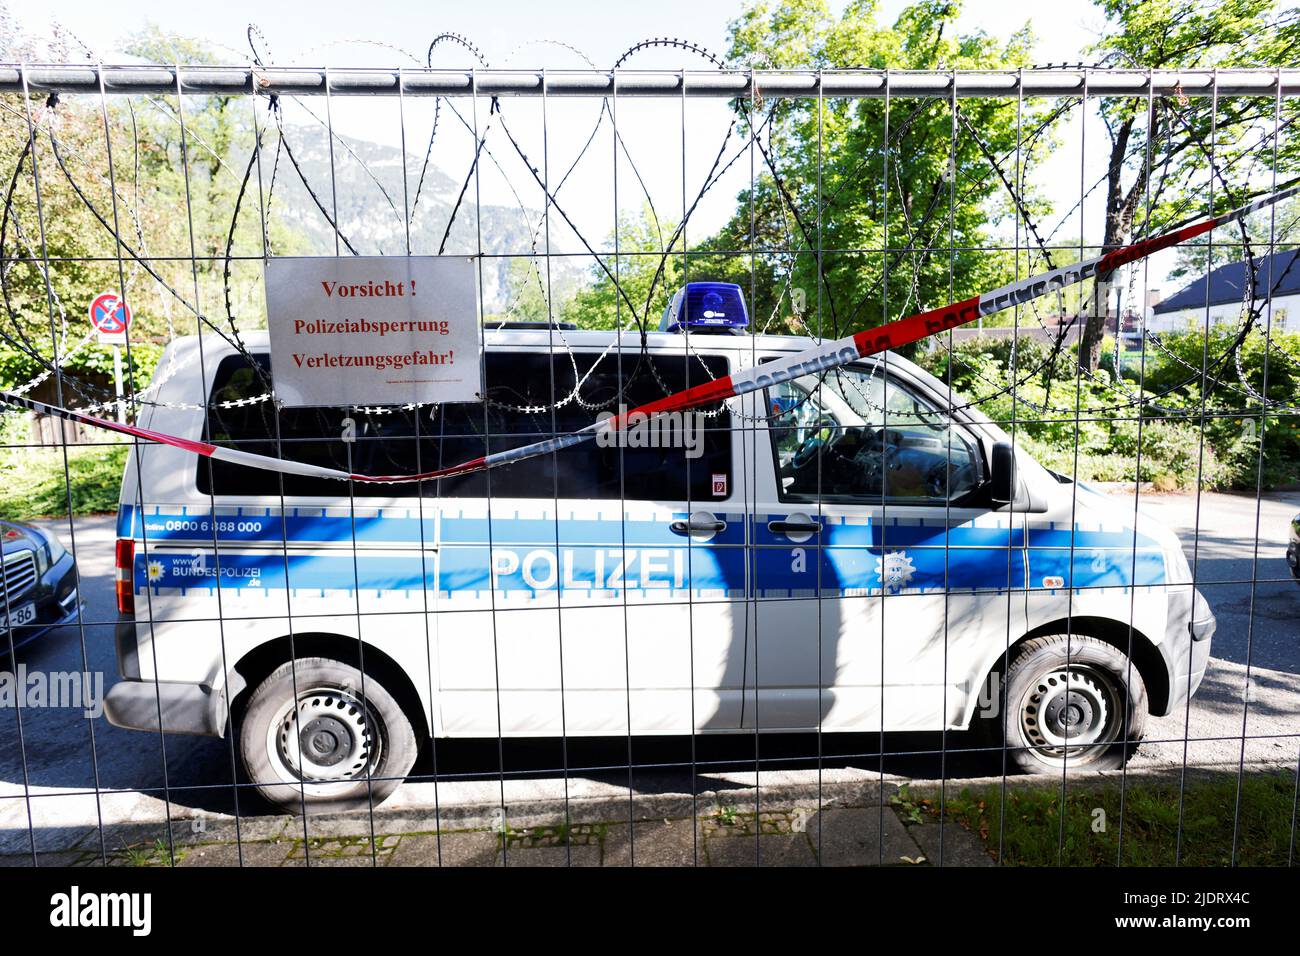 German police car parked behind a barbed wire fence in the southern Bavarian resort where the G7 Summit will be held, in Garmisch-Partenkirchen, Germany, June 23, 2022. REUTERS/Michaela Rehle Stock Photo